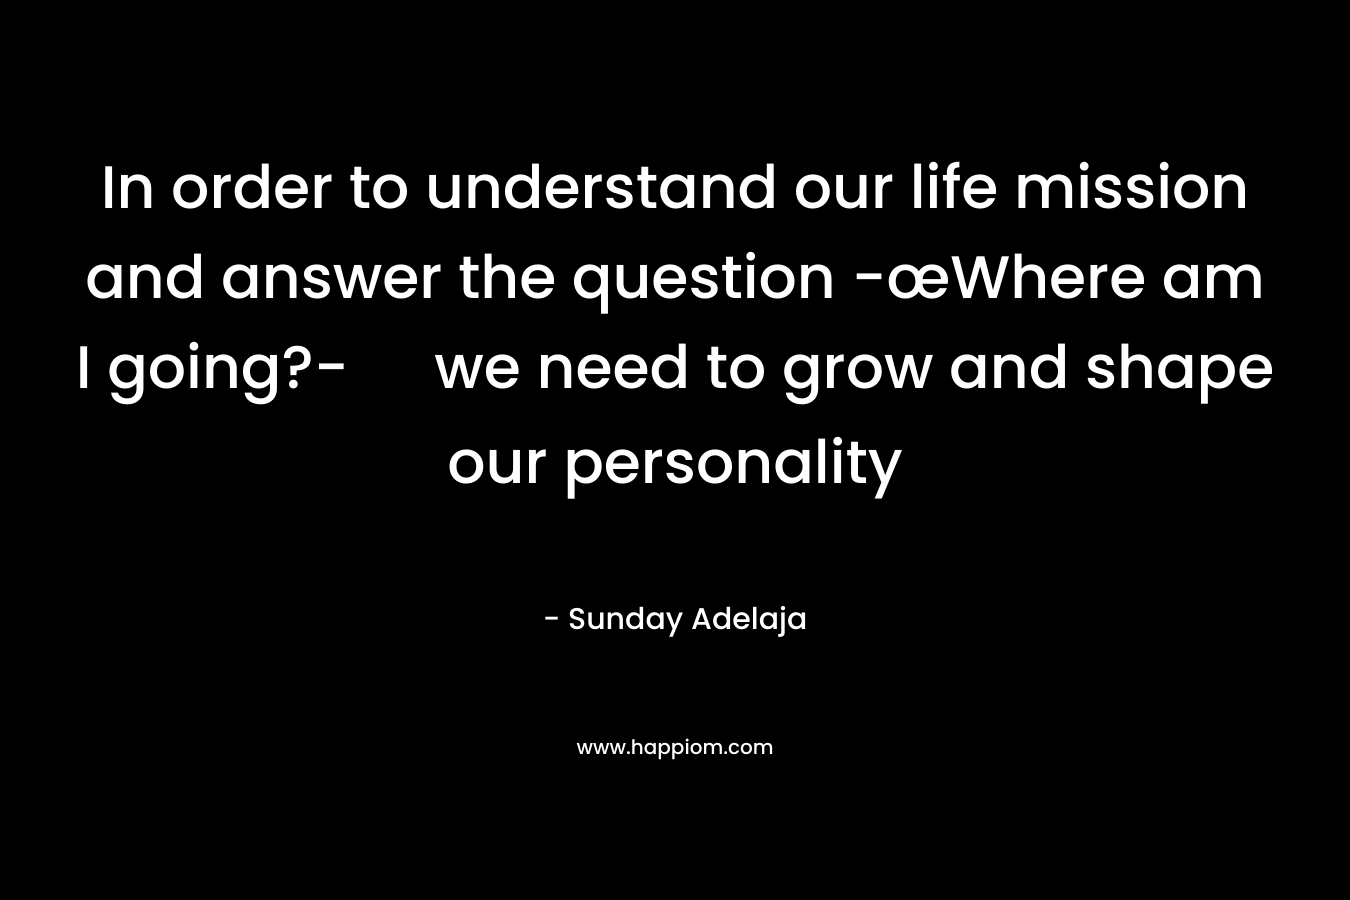 In order to understand our life mission and answer the question -œWhere am I going?- we need to grow and shape our personality